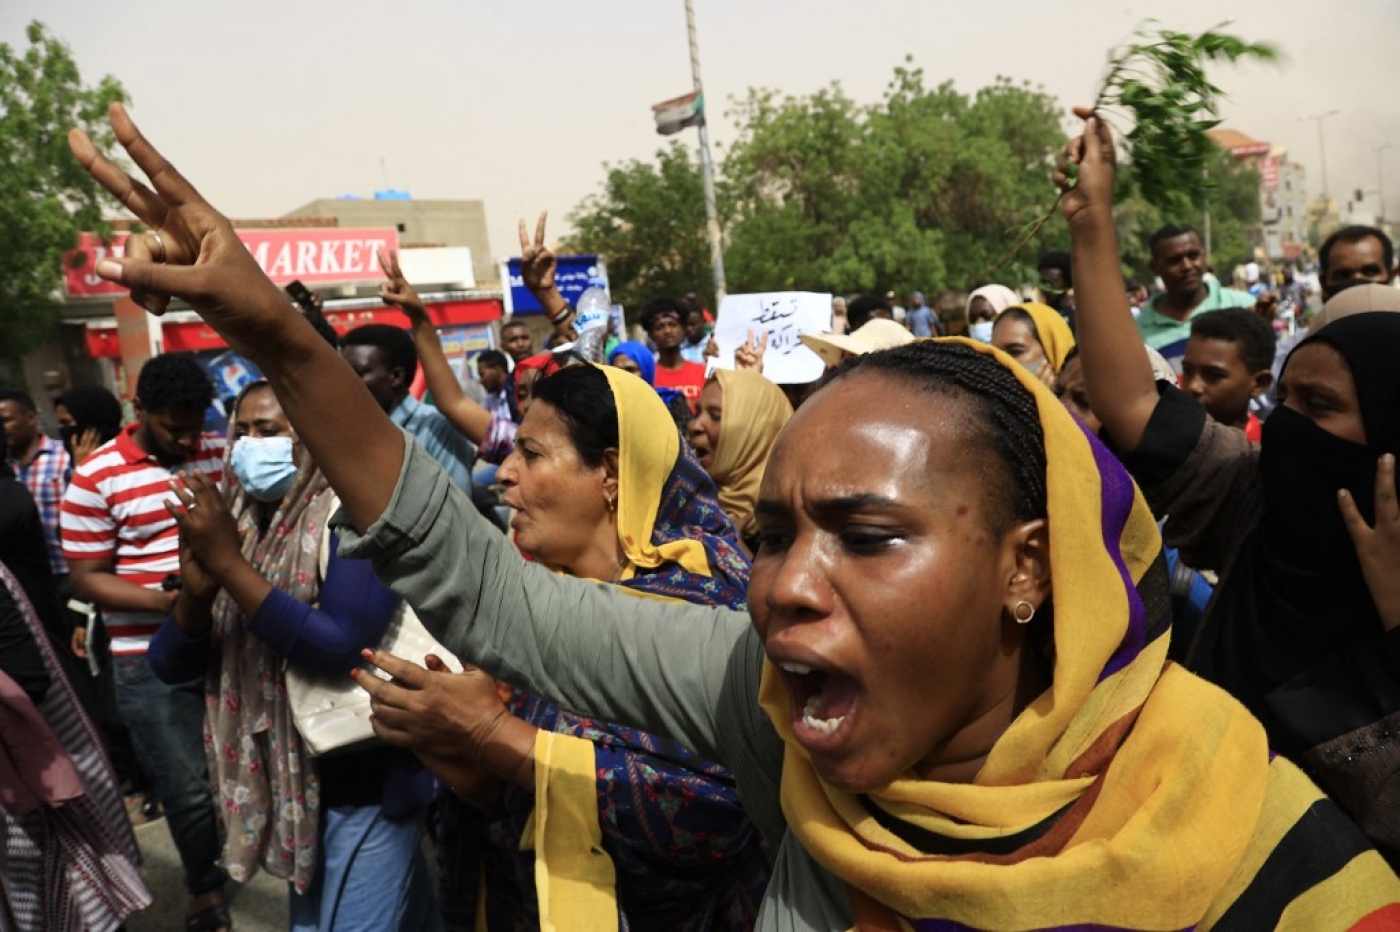 Sudanese march during a protest in the capital Khartoum urging the government to step down over recent harsh economic reforms on 30 June 2021.